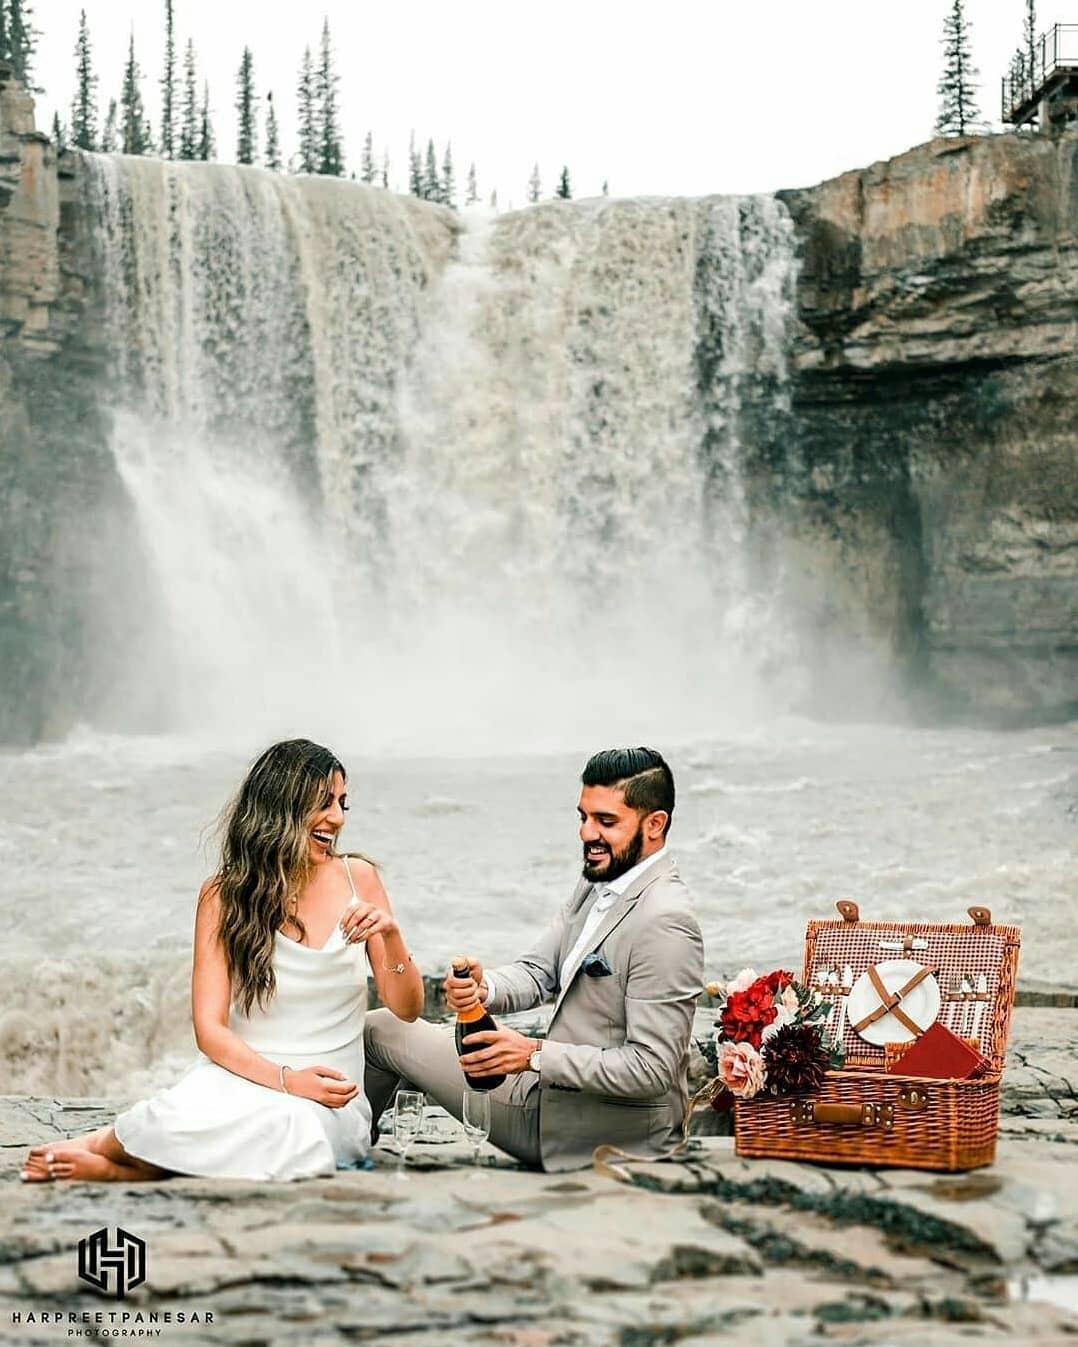 7 Different Poses to make your Pre-Wedding Photo Shoot Special